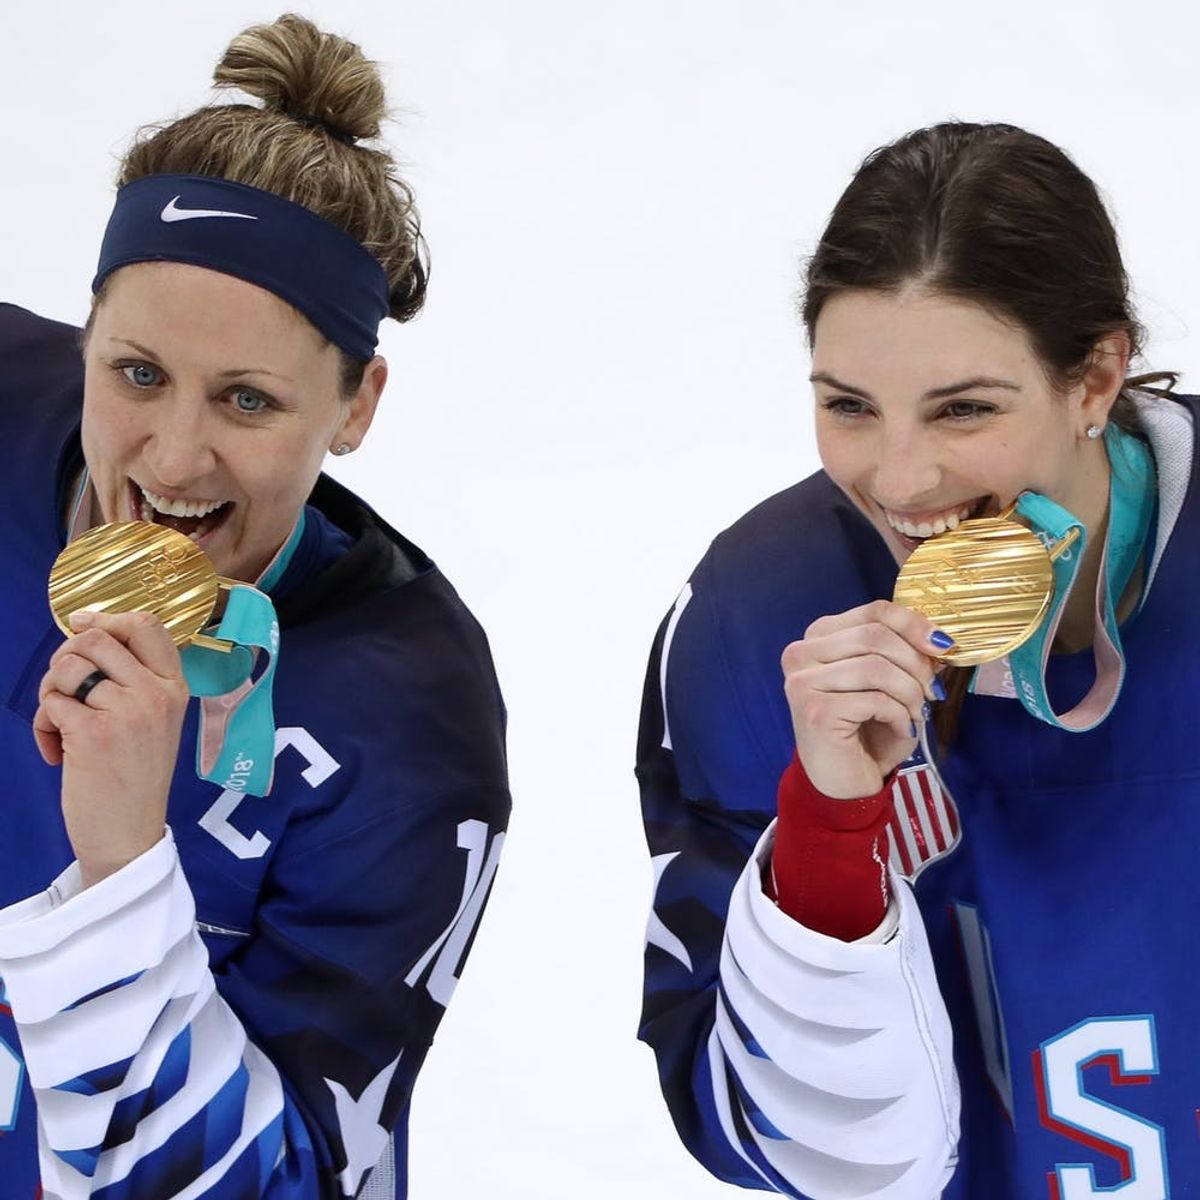 The US Women’s Hockey Team Just Won Their First Gold Medal in 20 Years